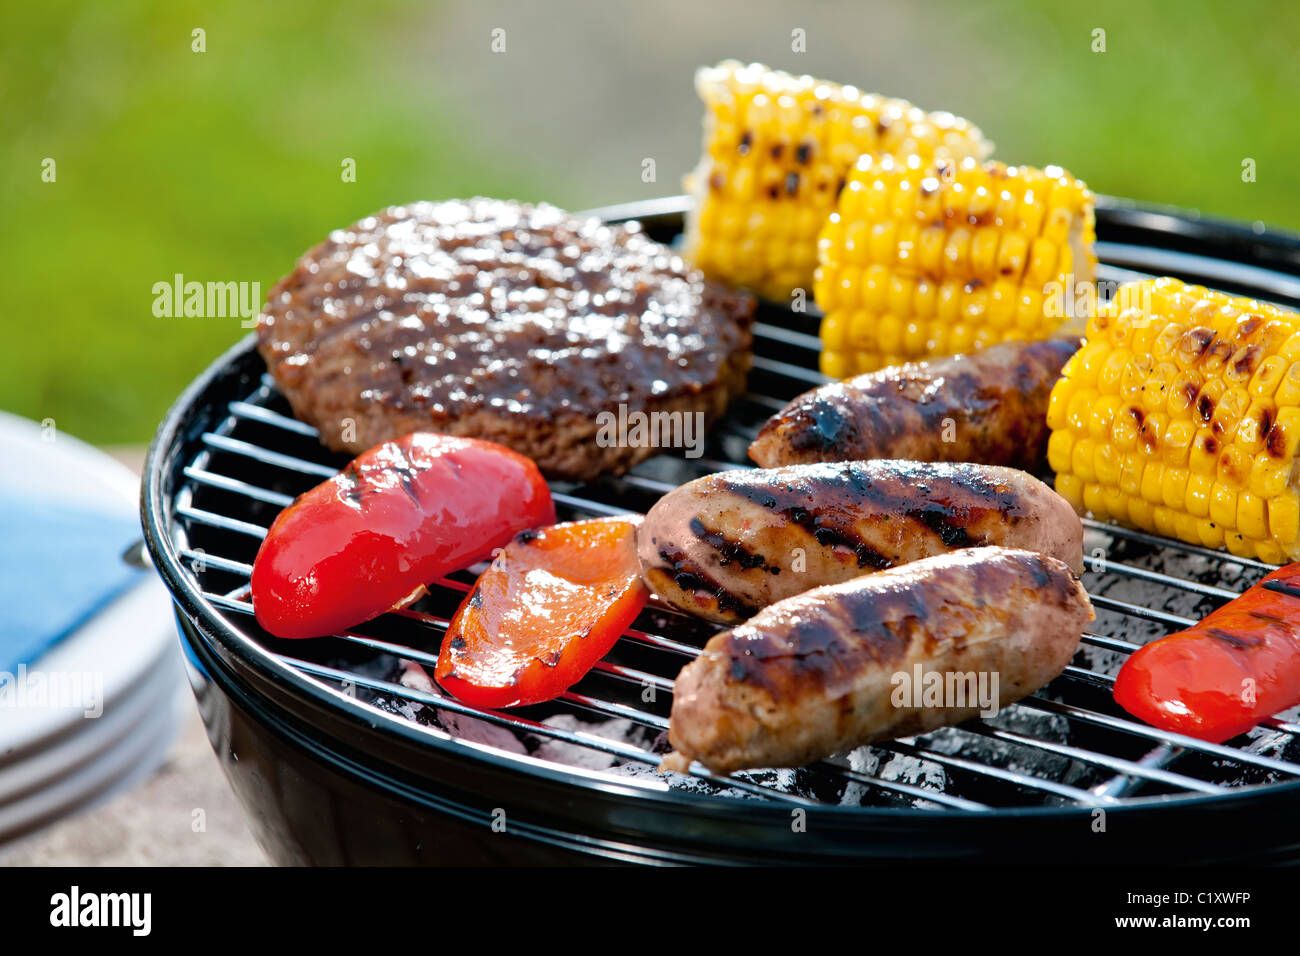 Barbecue food ready for serving. Stock Photo